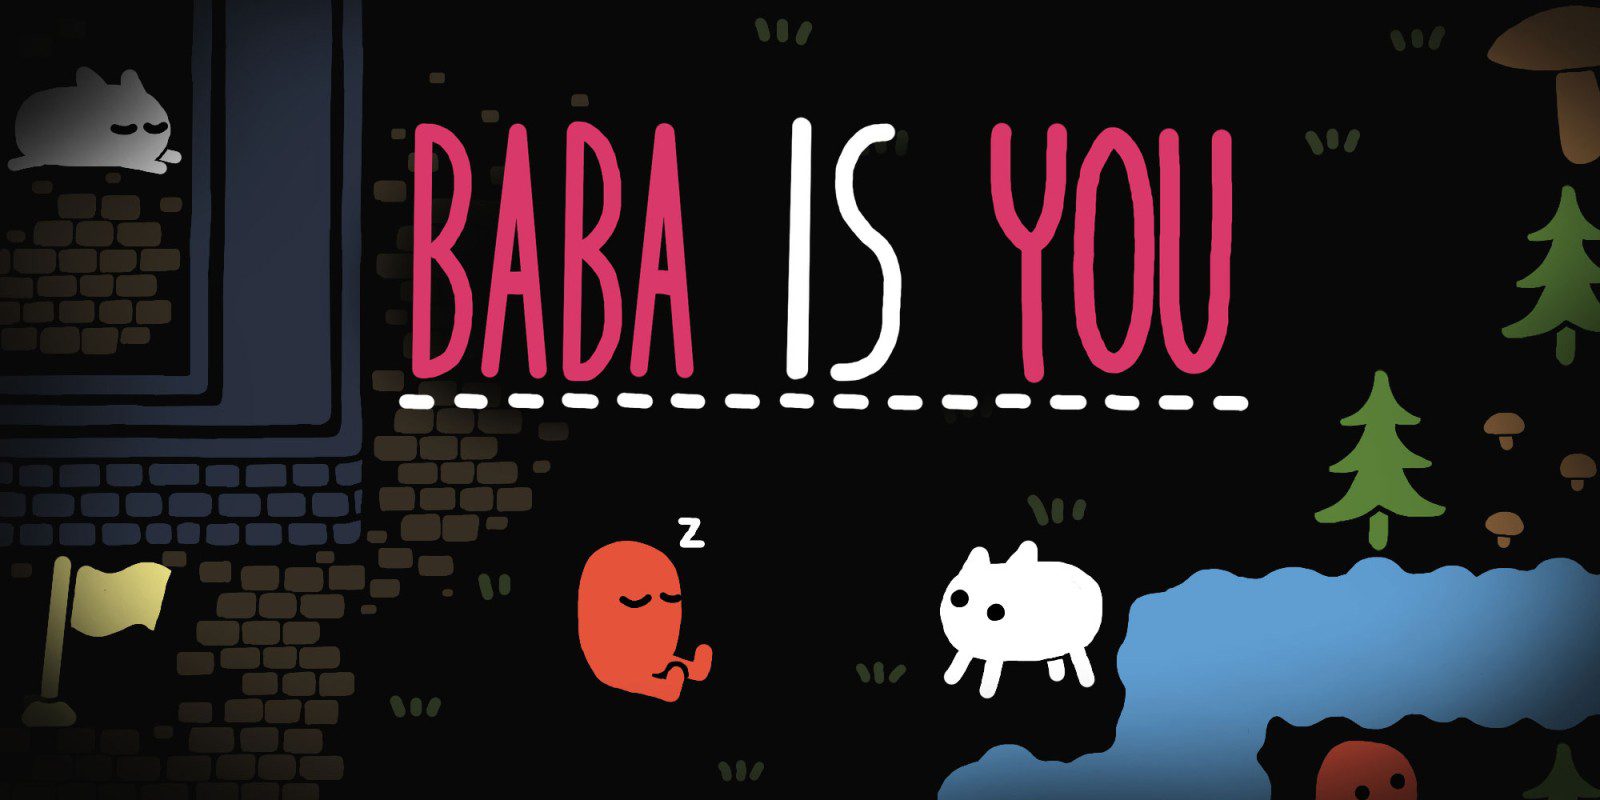 Award-winning puzzle game “Baba Is You” comes to Nintendo Switch